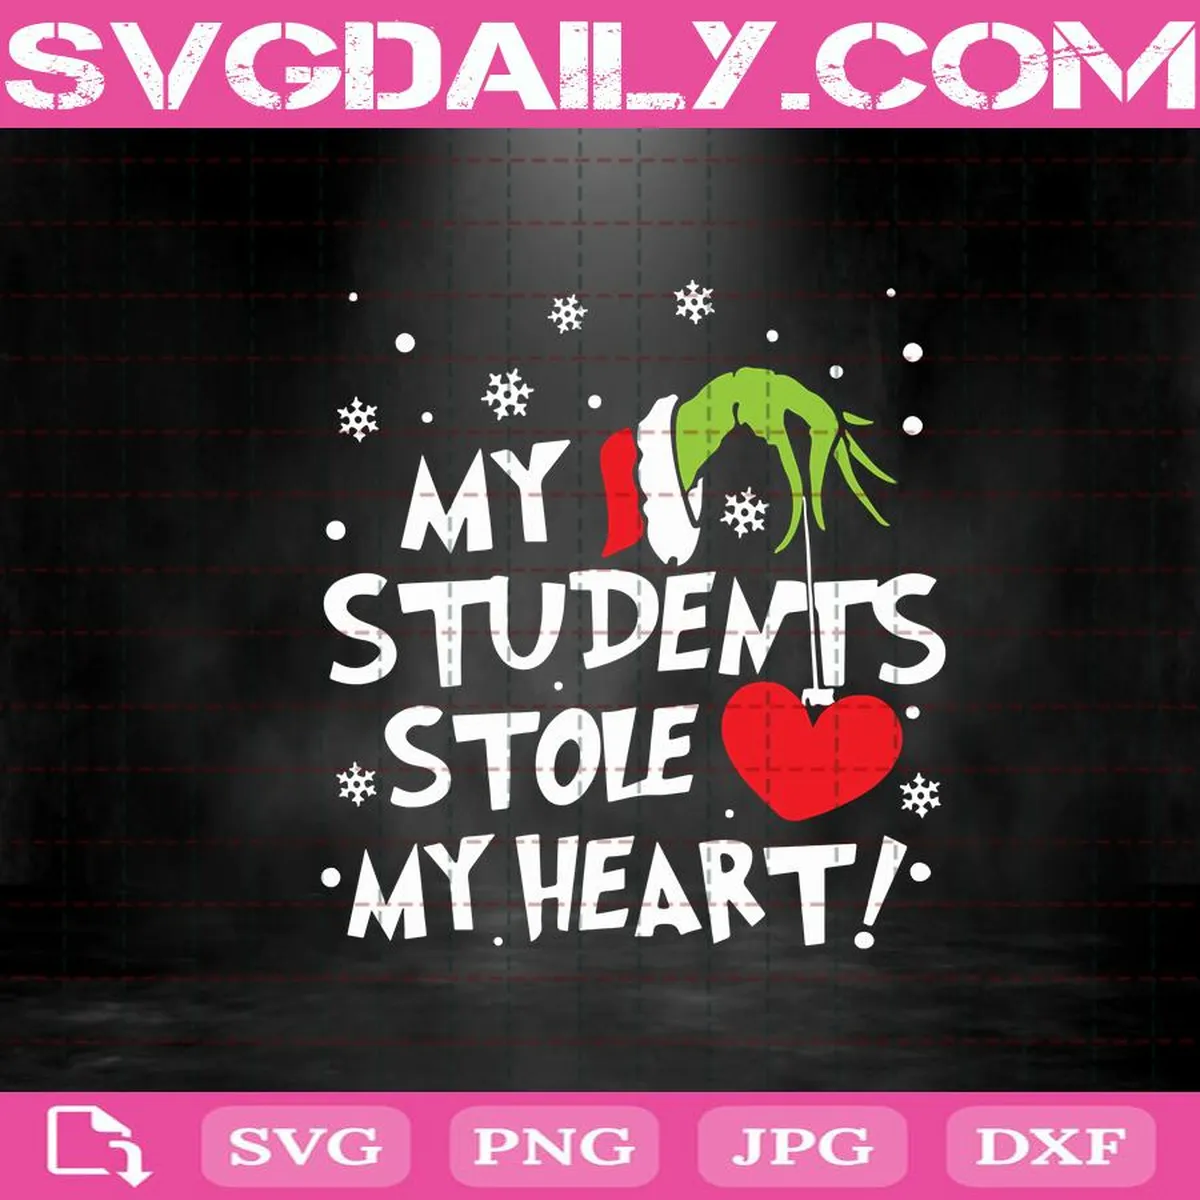 My Students Stole My Heart Svg, Grinch Christmas Svg, Grinch Svg, Christmas Svg, Grinch Hand Svg, Svg Png Dxf Eps Download Files